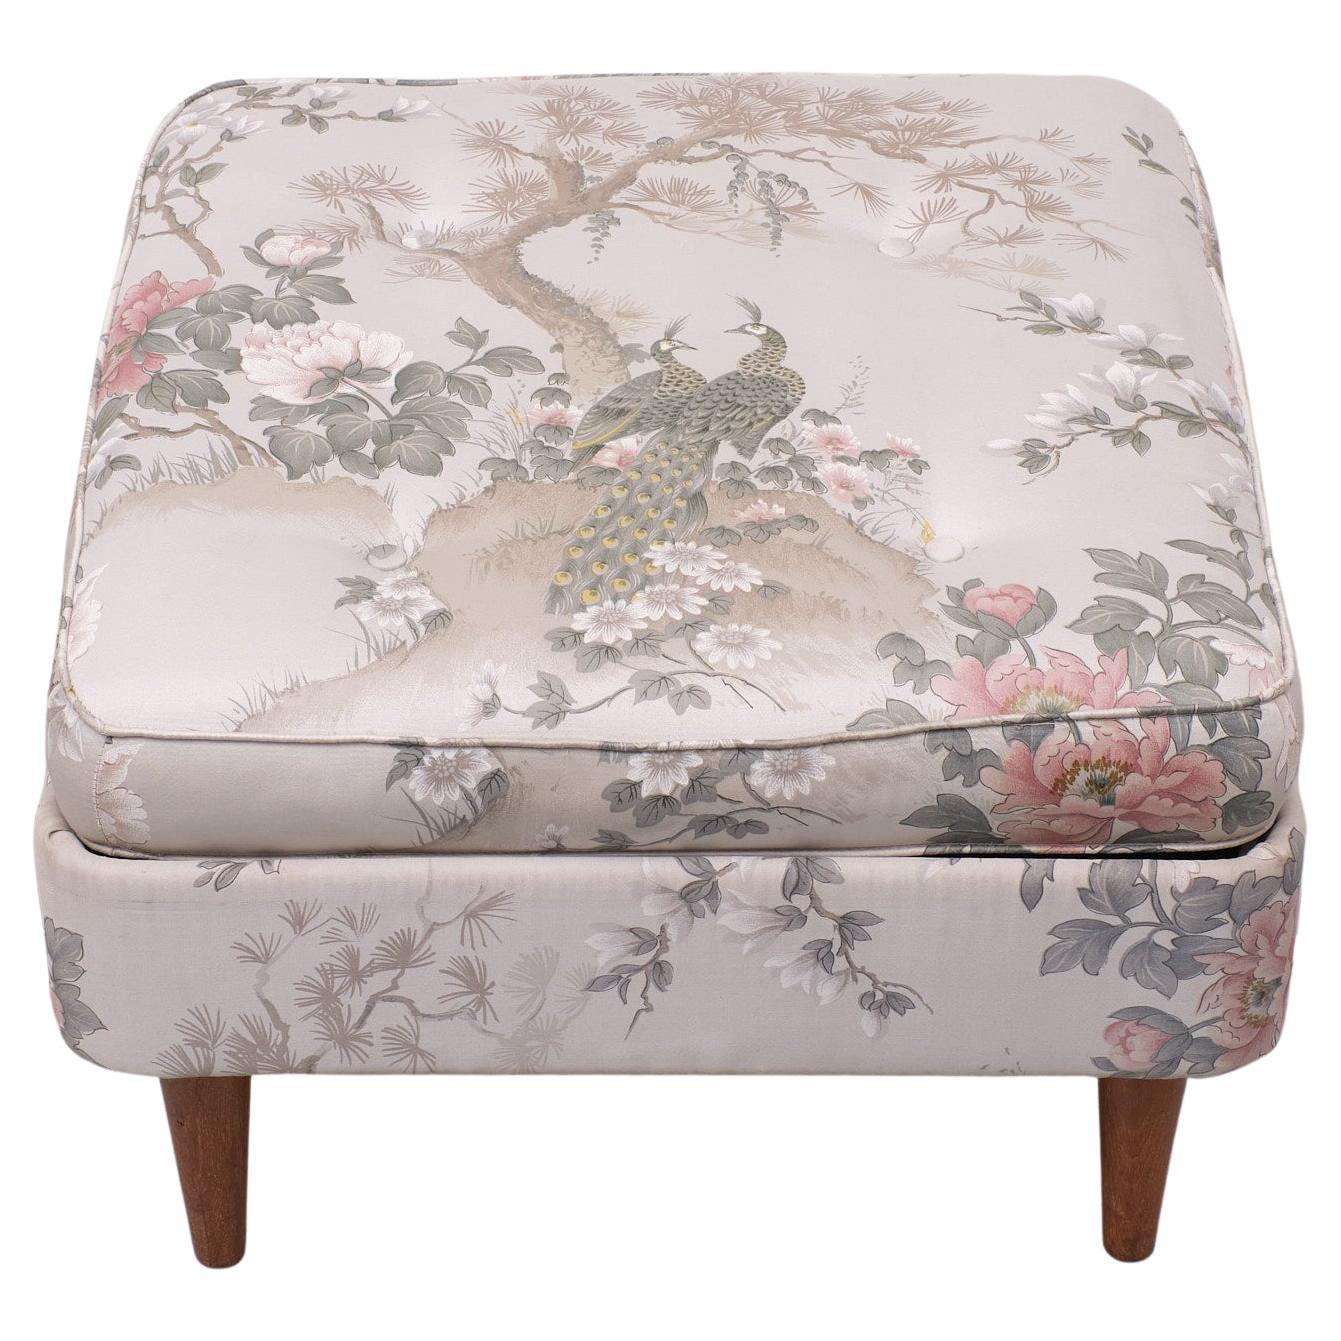 Very nice Pouf .Silk upholstery . Two Peacocks .in a land scape .  Hollywood Regency style .Solid Teak feet . So stylish.  

Please don't hesitate to reach out for alternative shipping quote